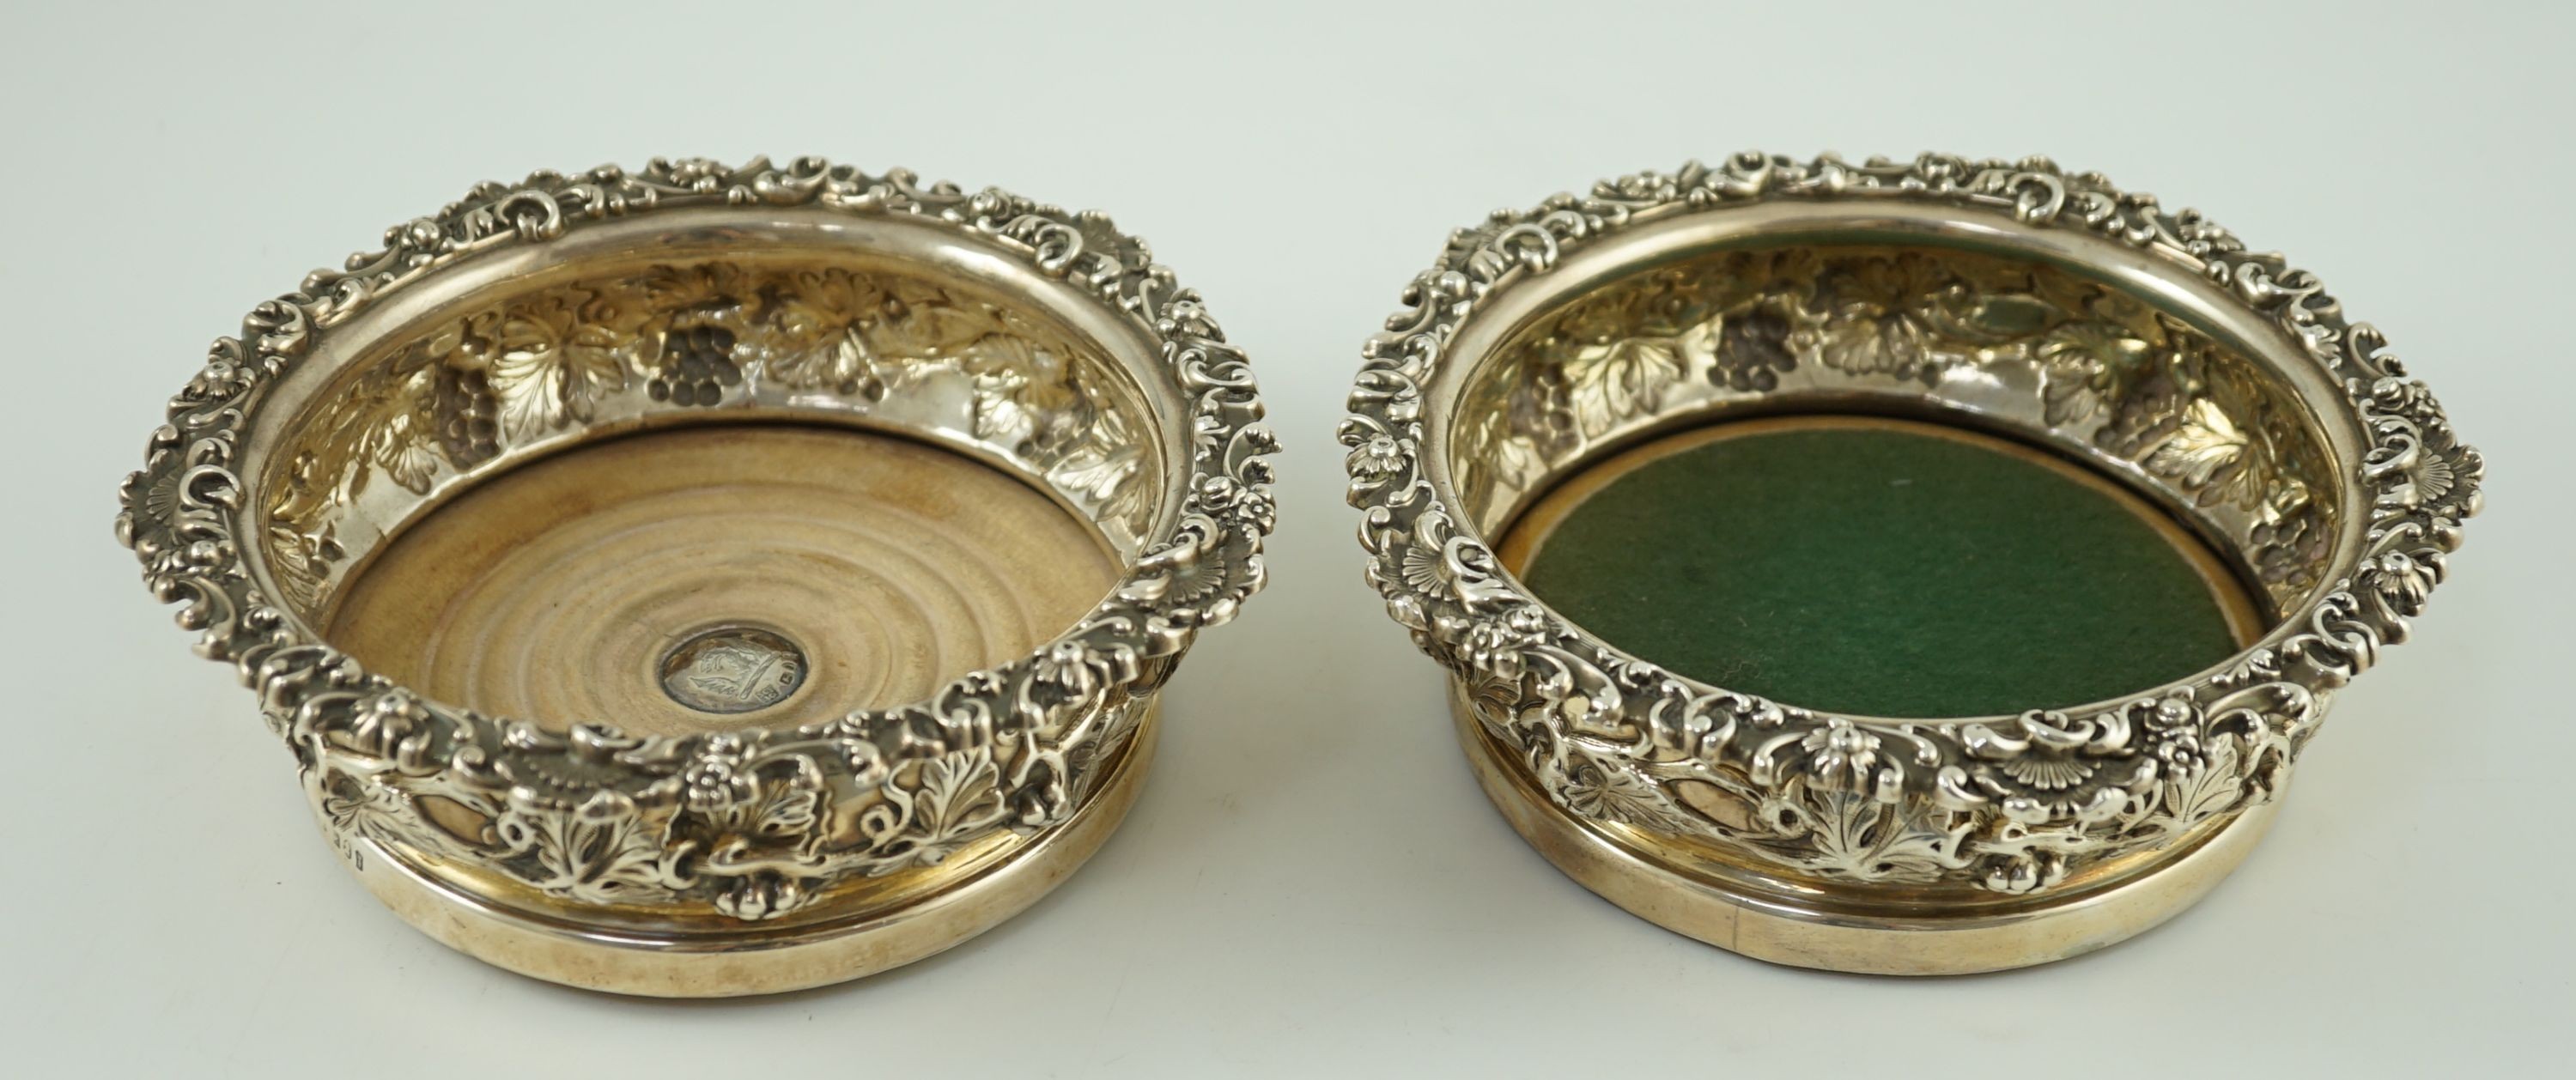 A pair of George IV silver mounted wine coasters, by S.C. Younge & Co